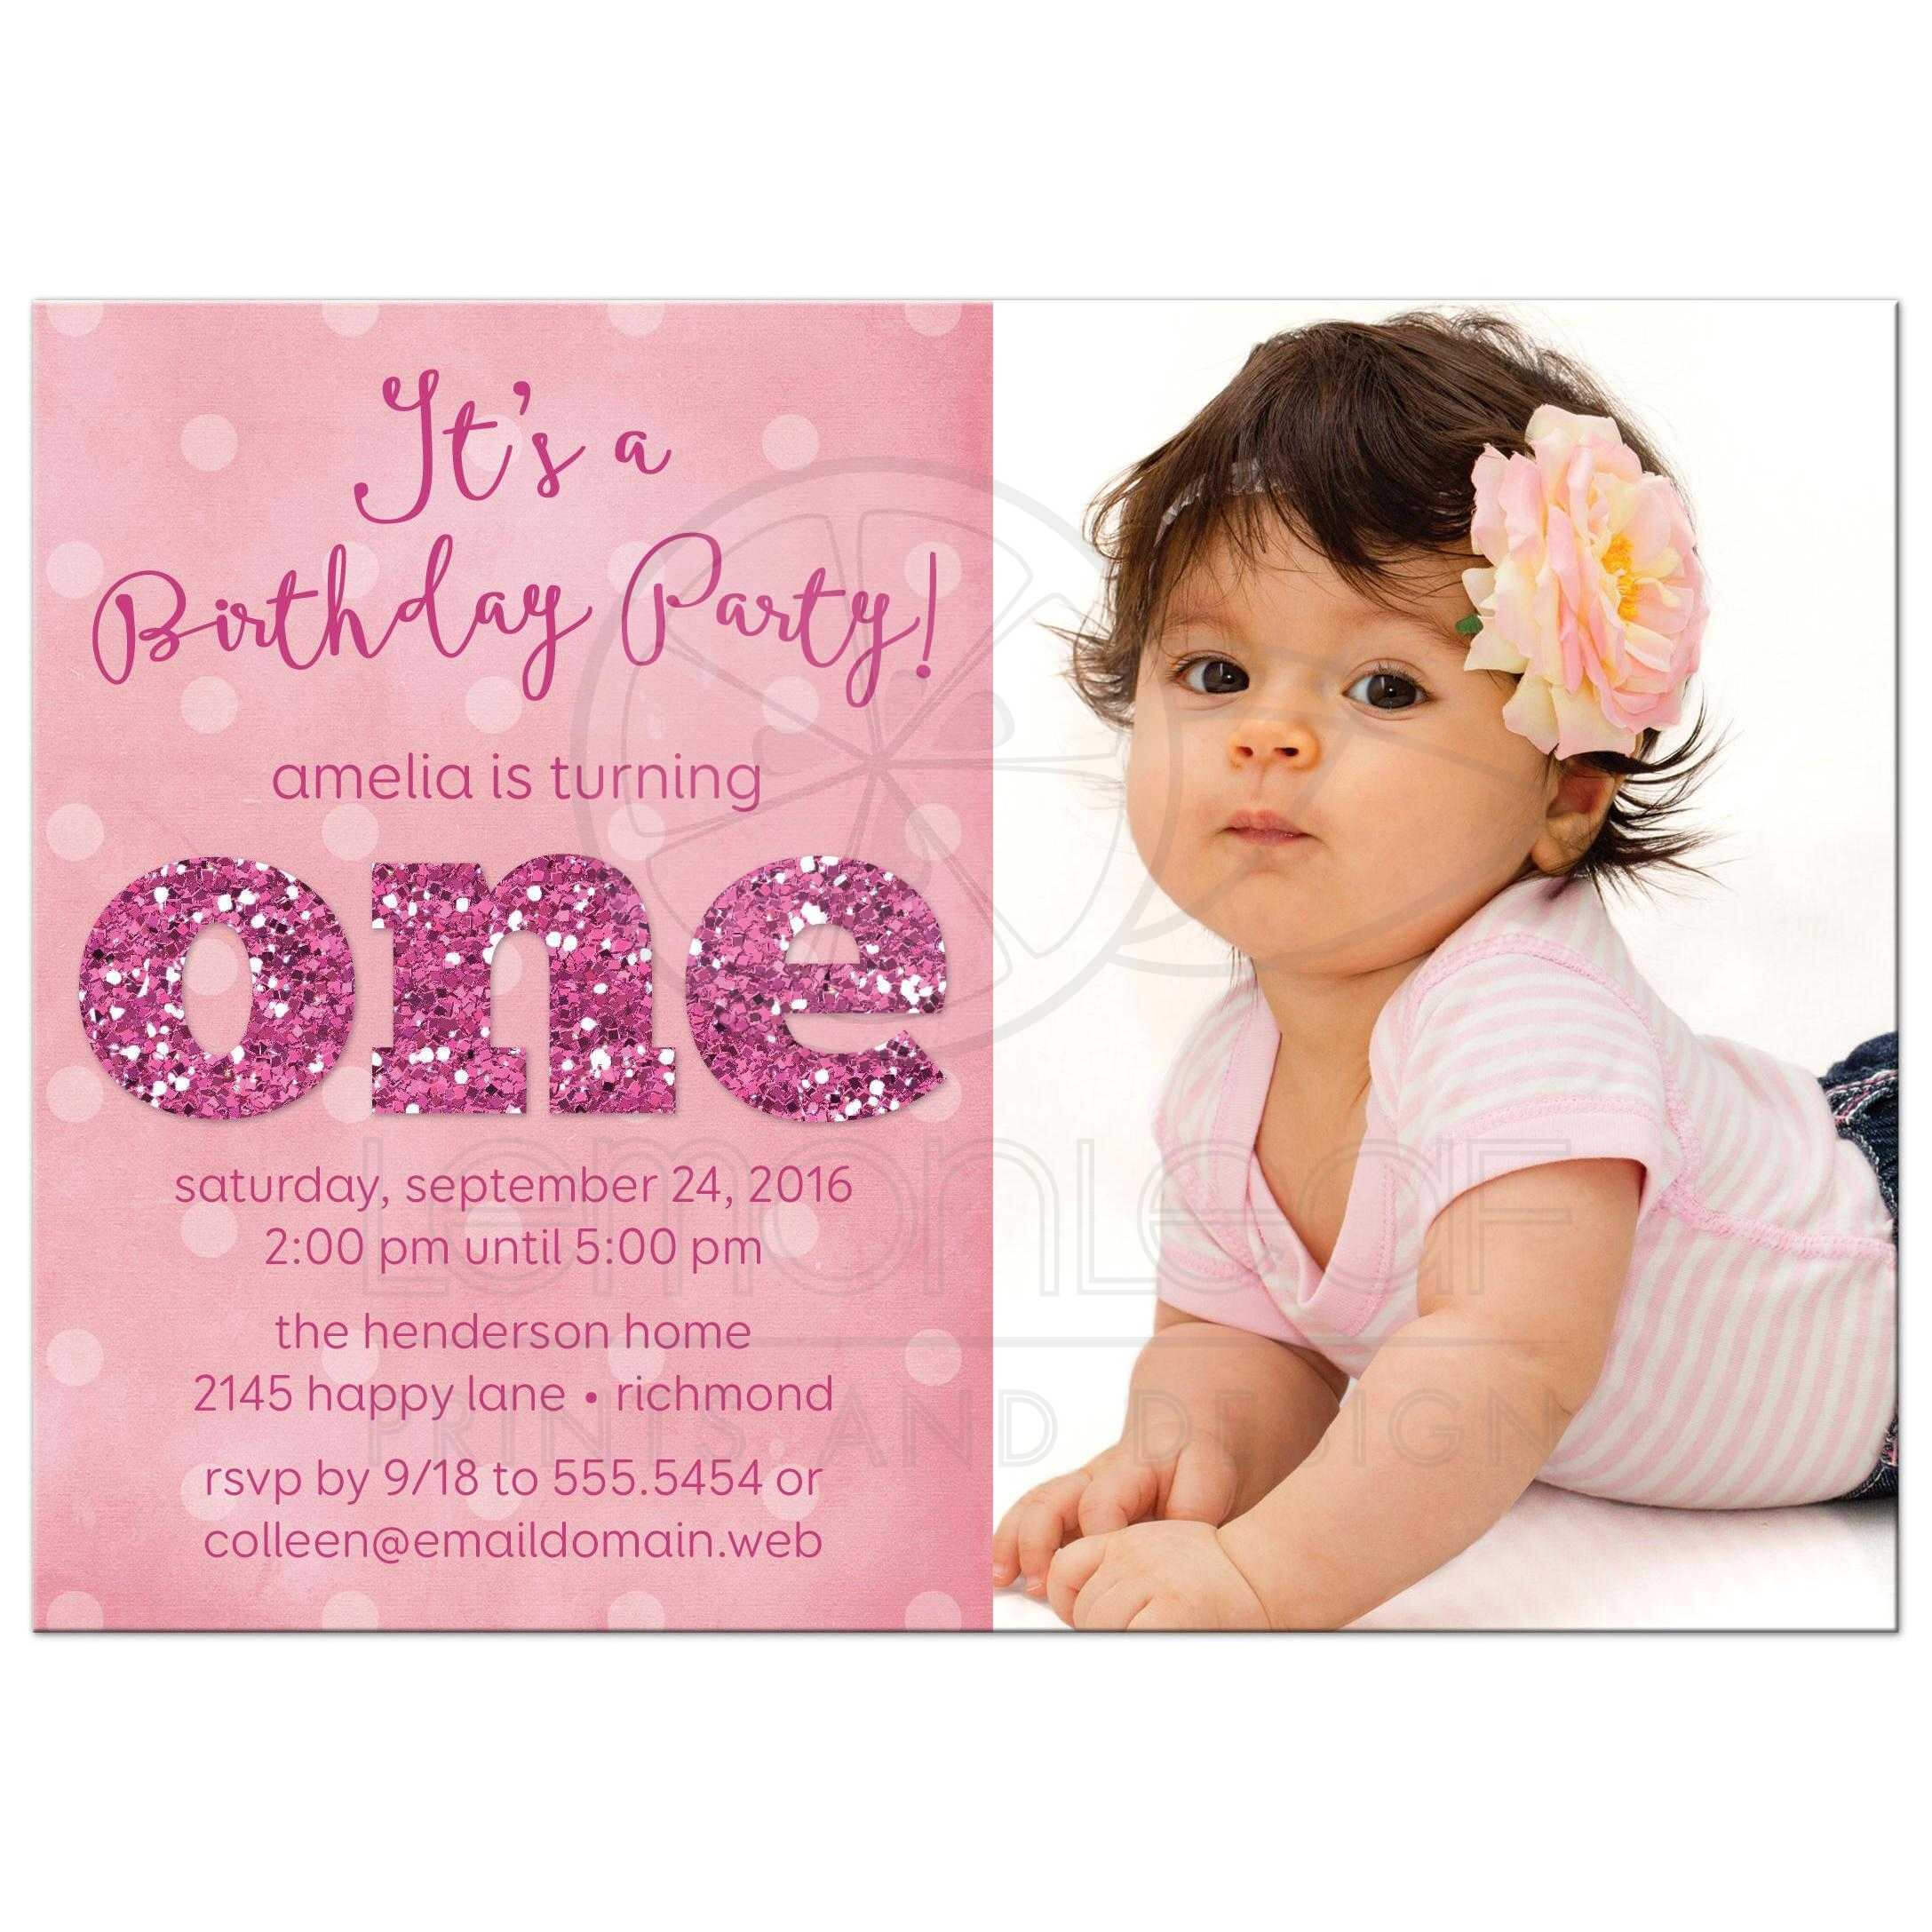 baby-birthday-party-invitations-calep-midnightpig-co-with-first-birthday-invitation-card